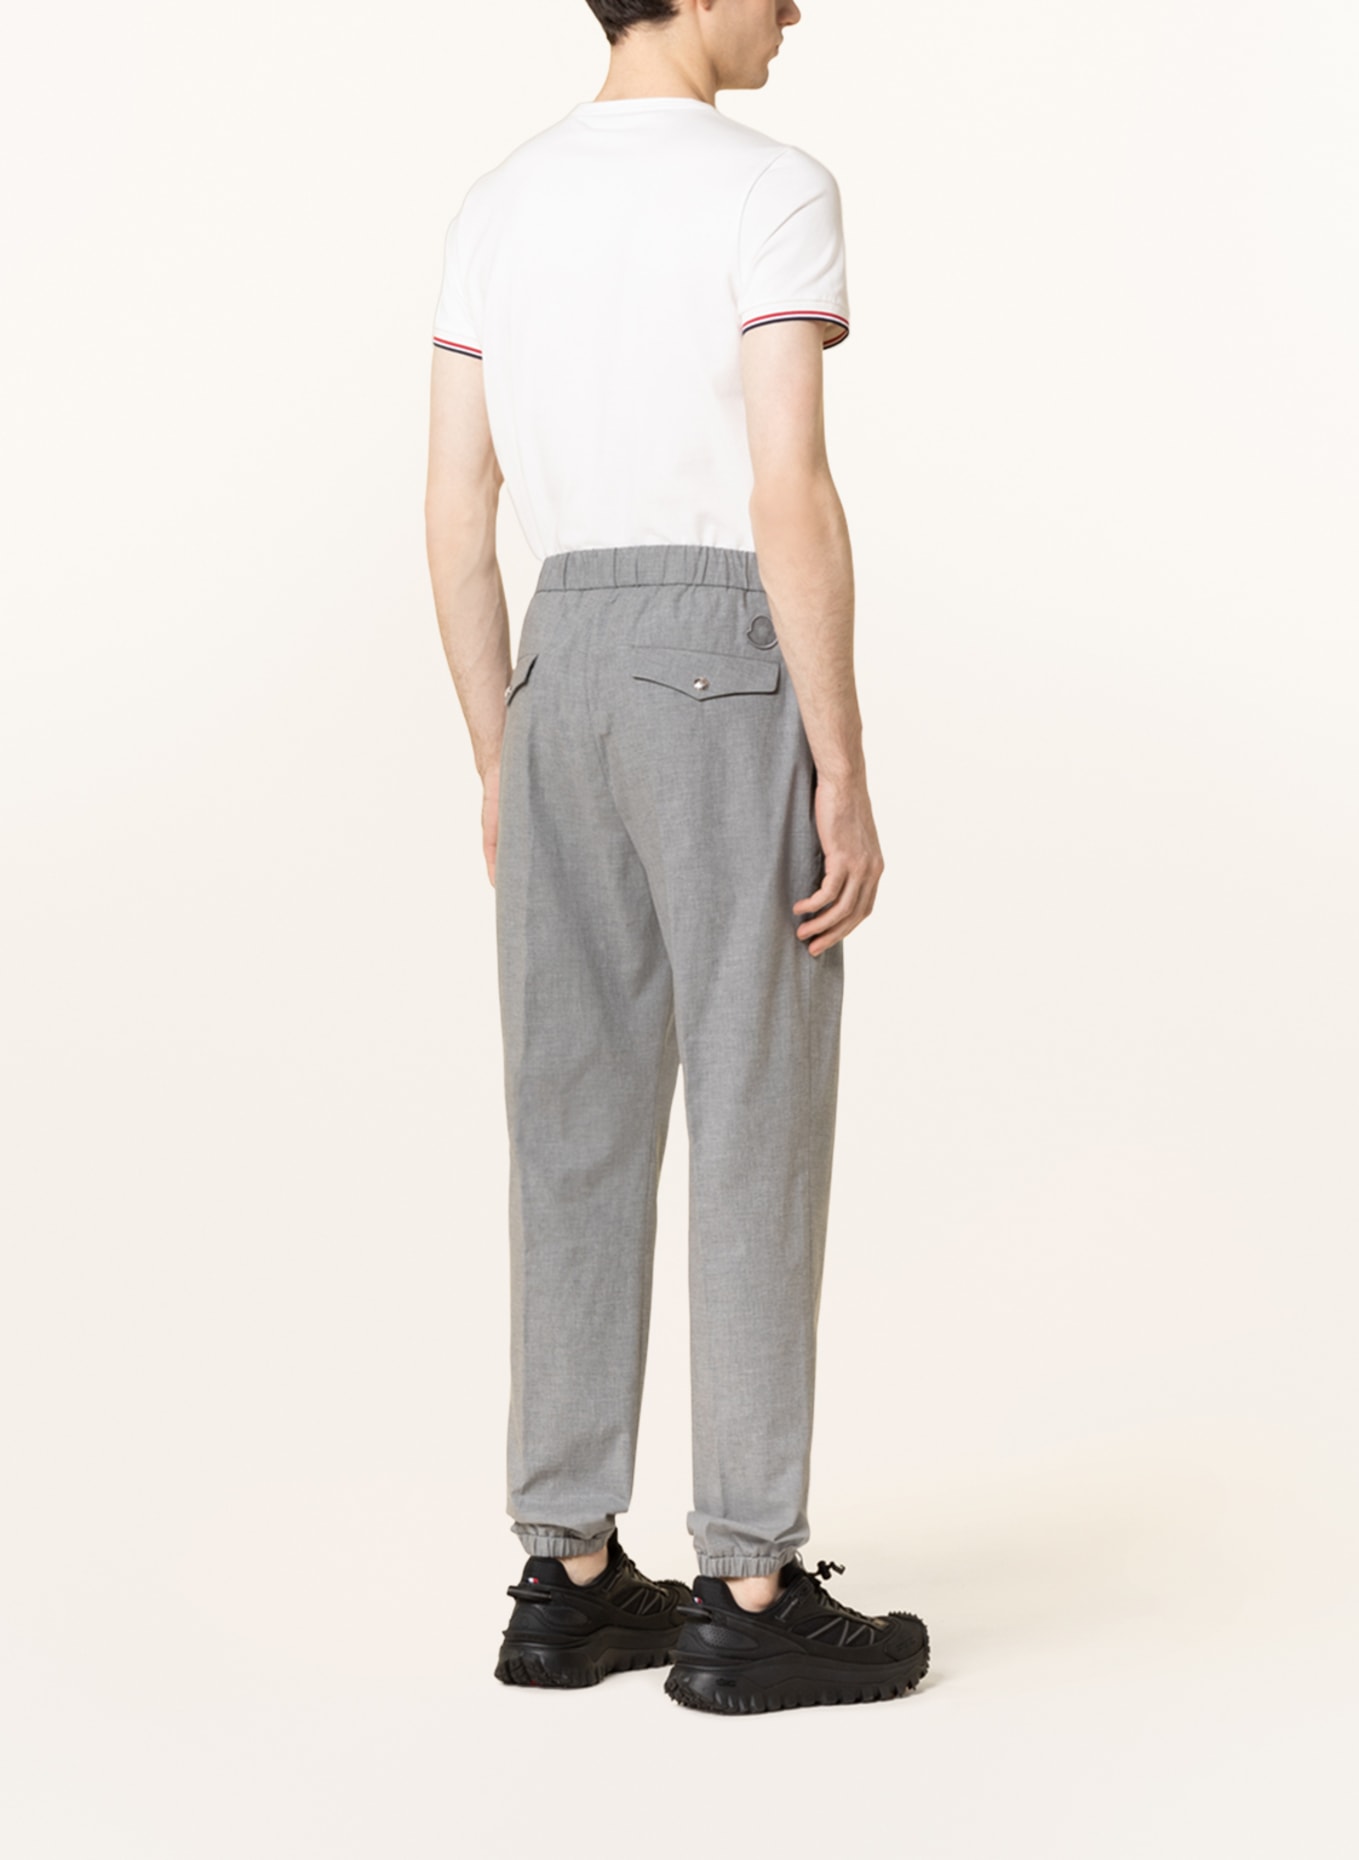 MONCLER Pants in jogger style, Color: GRAY (Image 3)